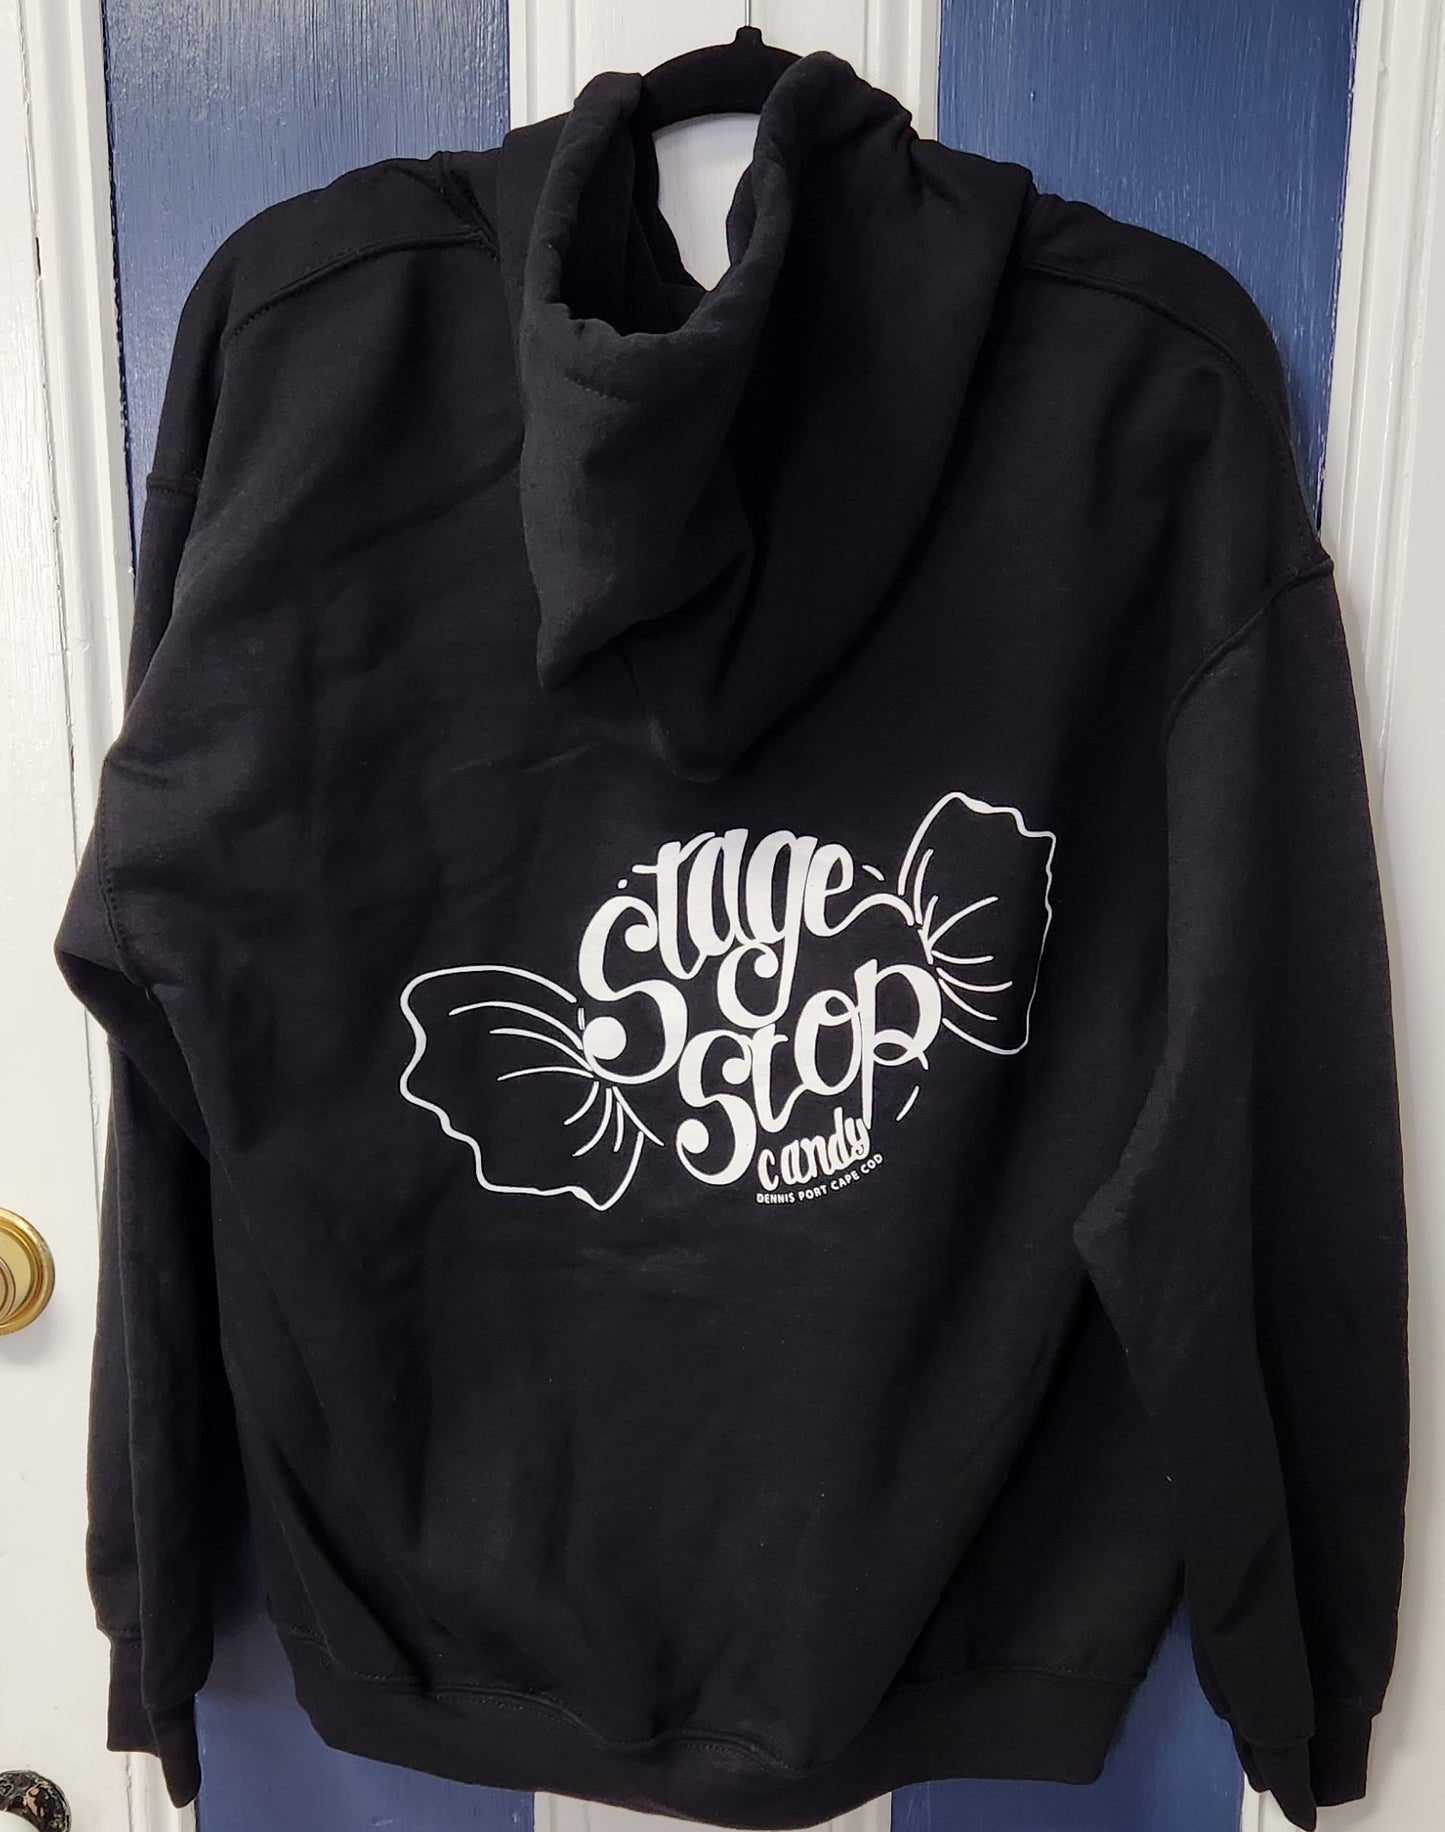 Back Design of Stage Stop Candy Hooded Sweatshirt, designed by Sengas